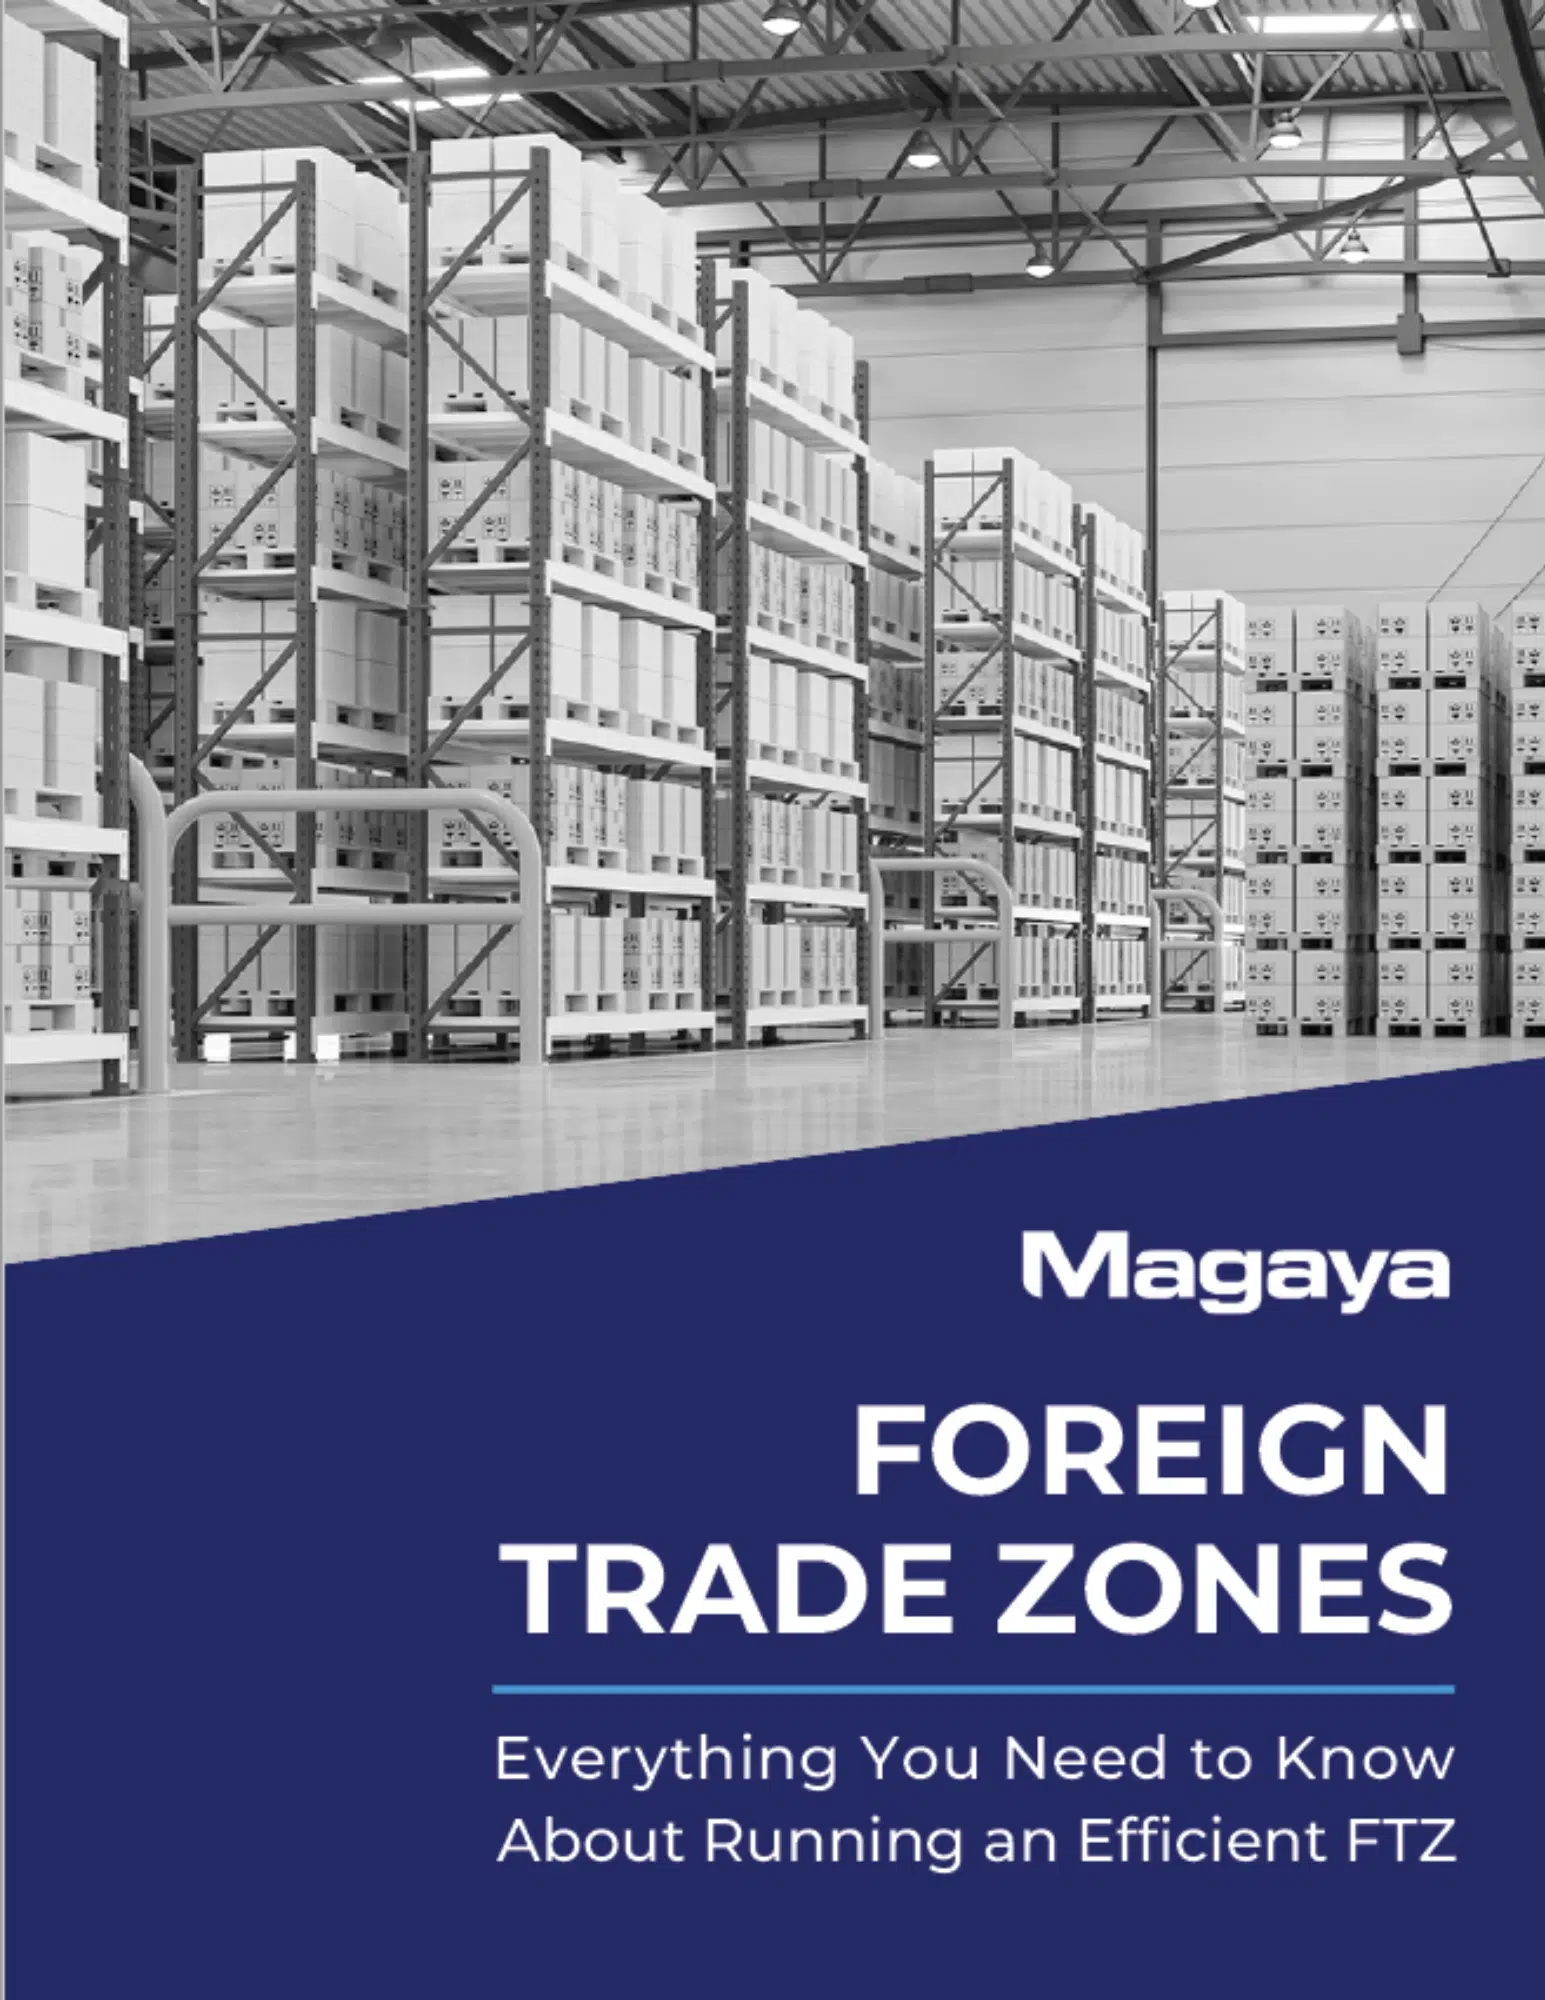 FTZ White Paper Cover - Foreign Trade Zones - Everything You Need to Run an Efficient FTZ